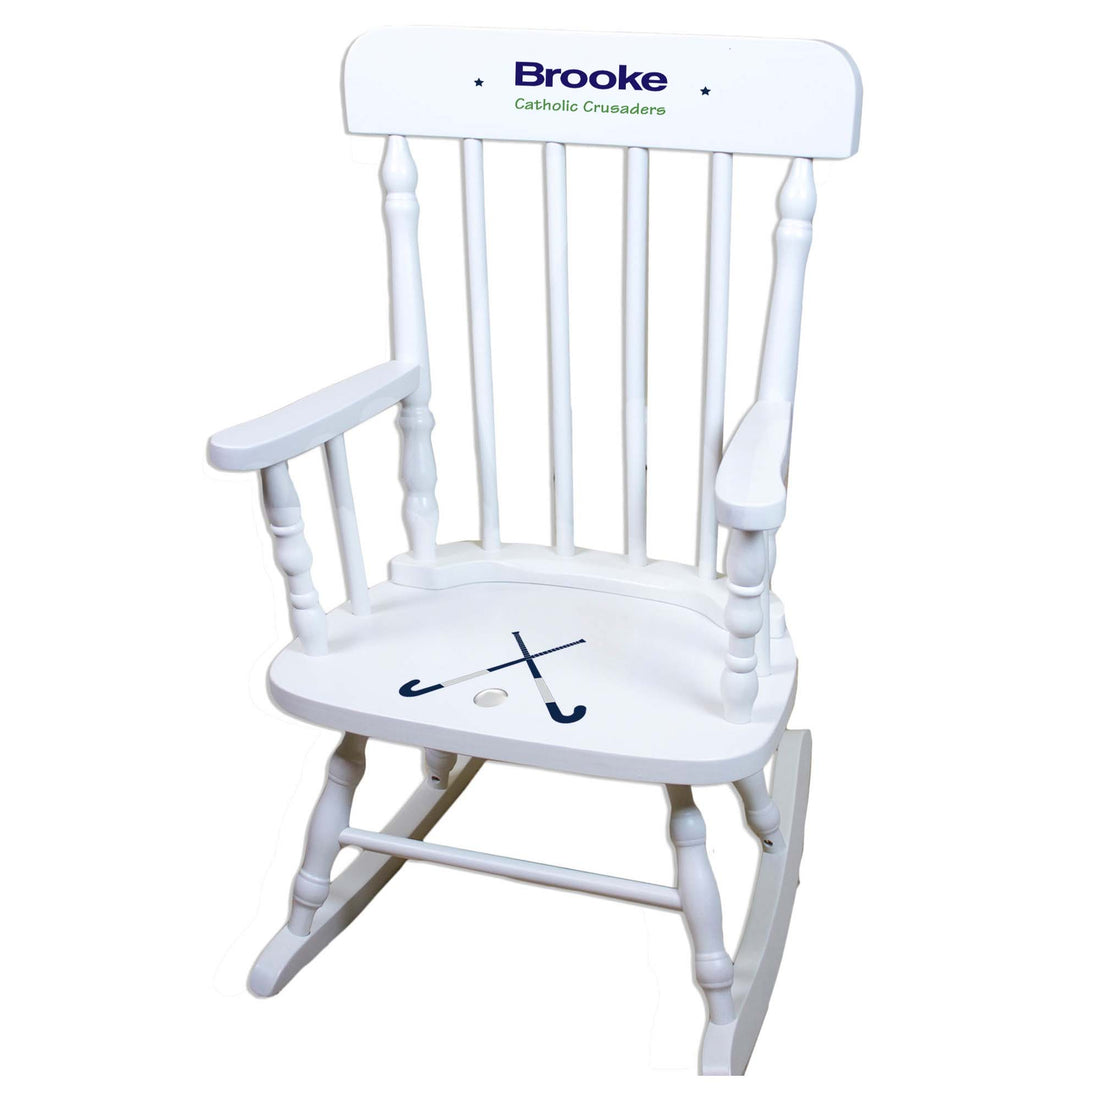 Field Hockey White Personalized Wooden ,rocking chairs